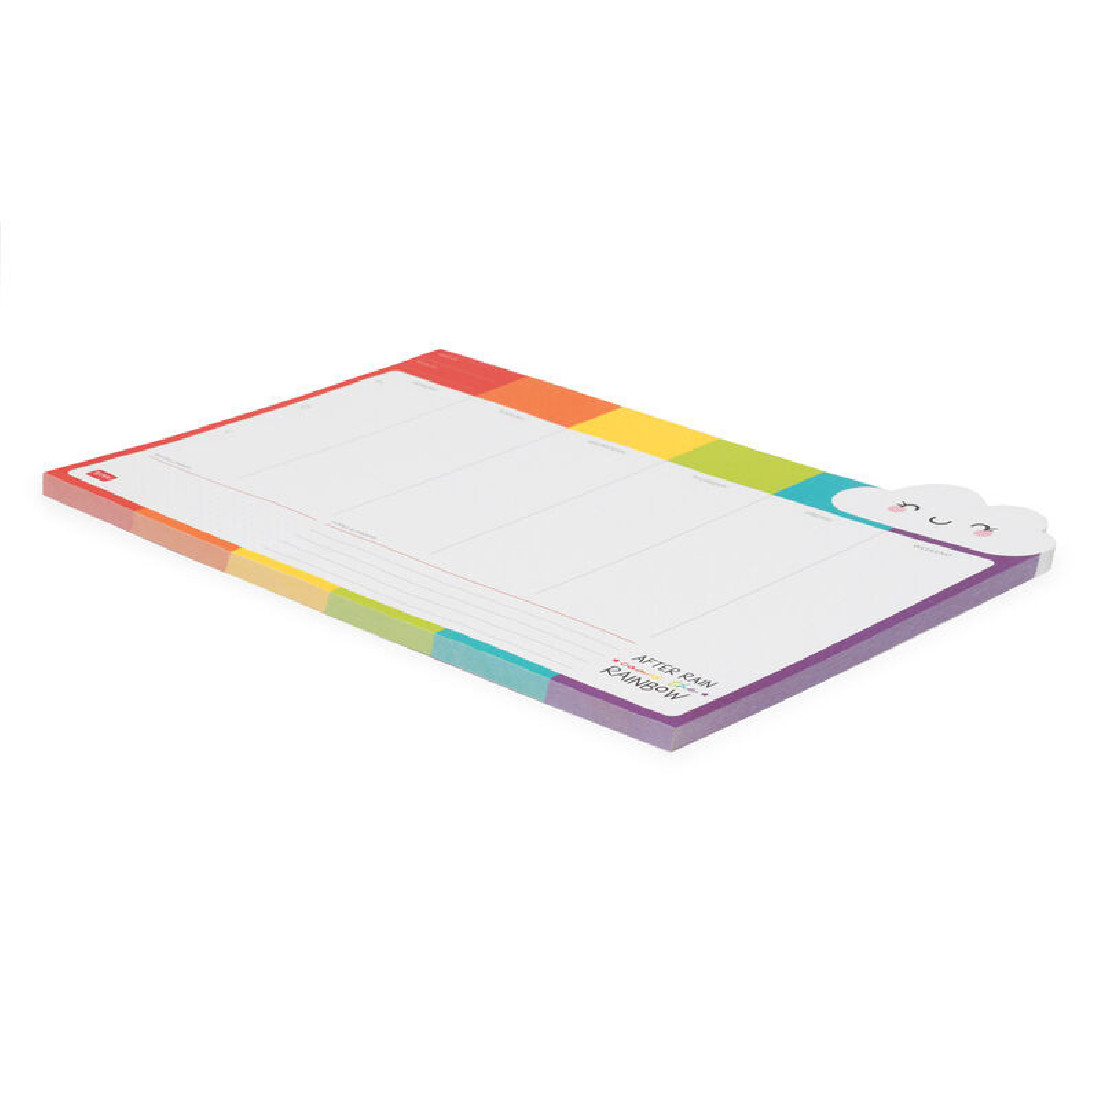 DESK PLANNER  SMART WEEK - AFTER RAIN COMES THE RAINBOW  LEGAMI